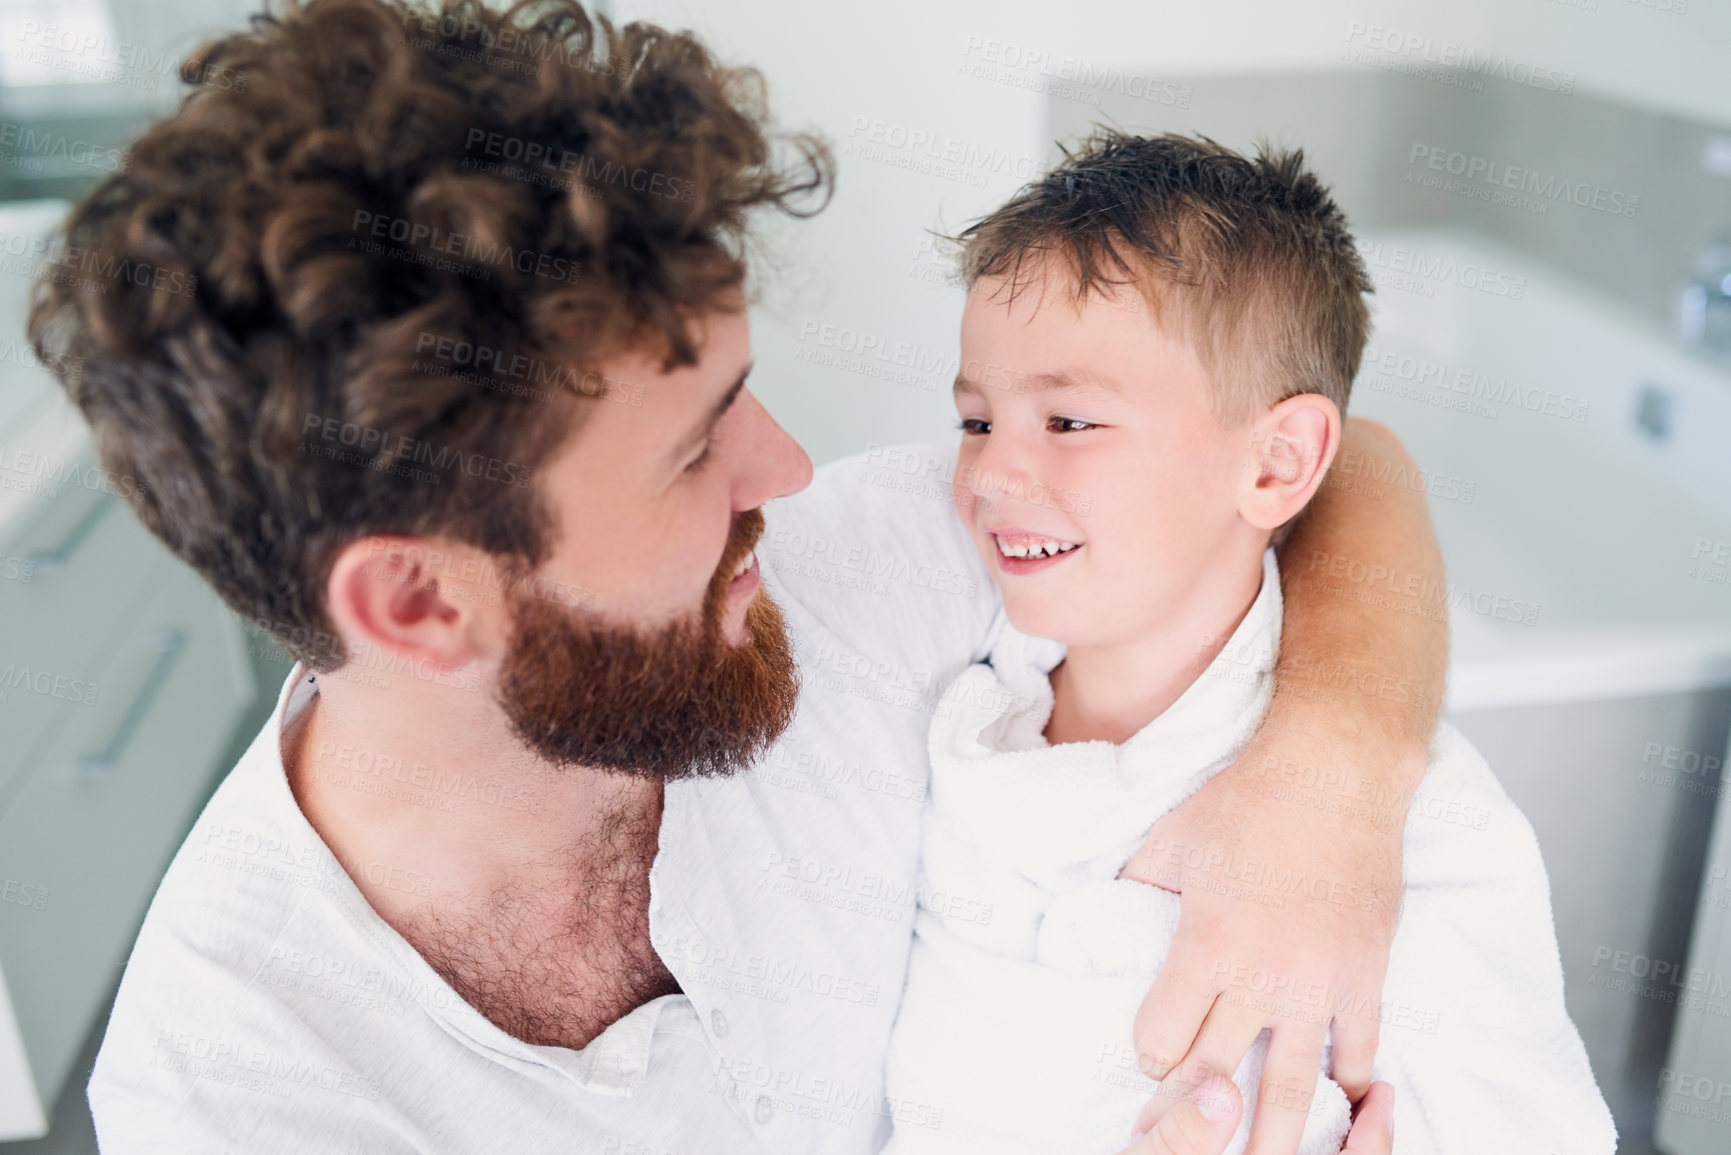 Buy stock photo Cropped shot of a young handsome father drying his adorable little son after a bath in the bathroom at home